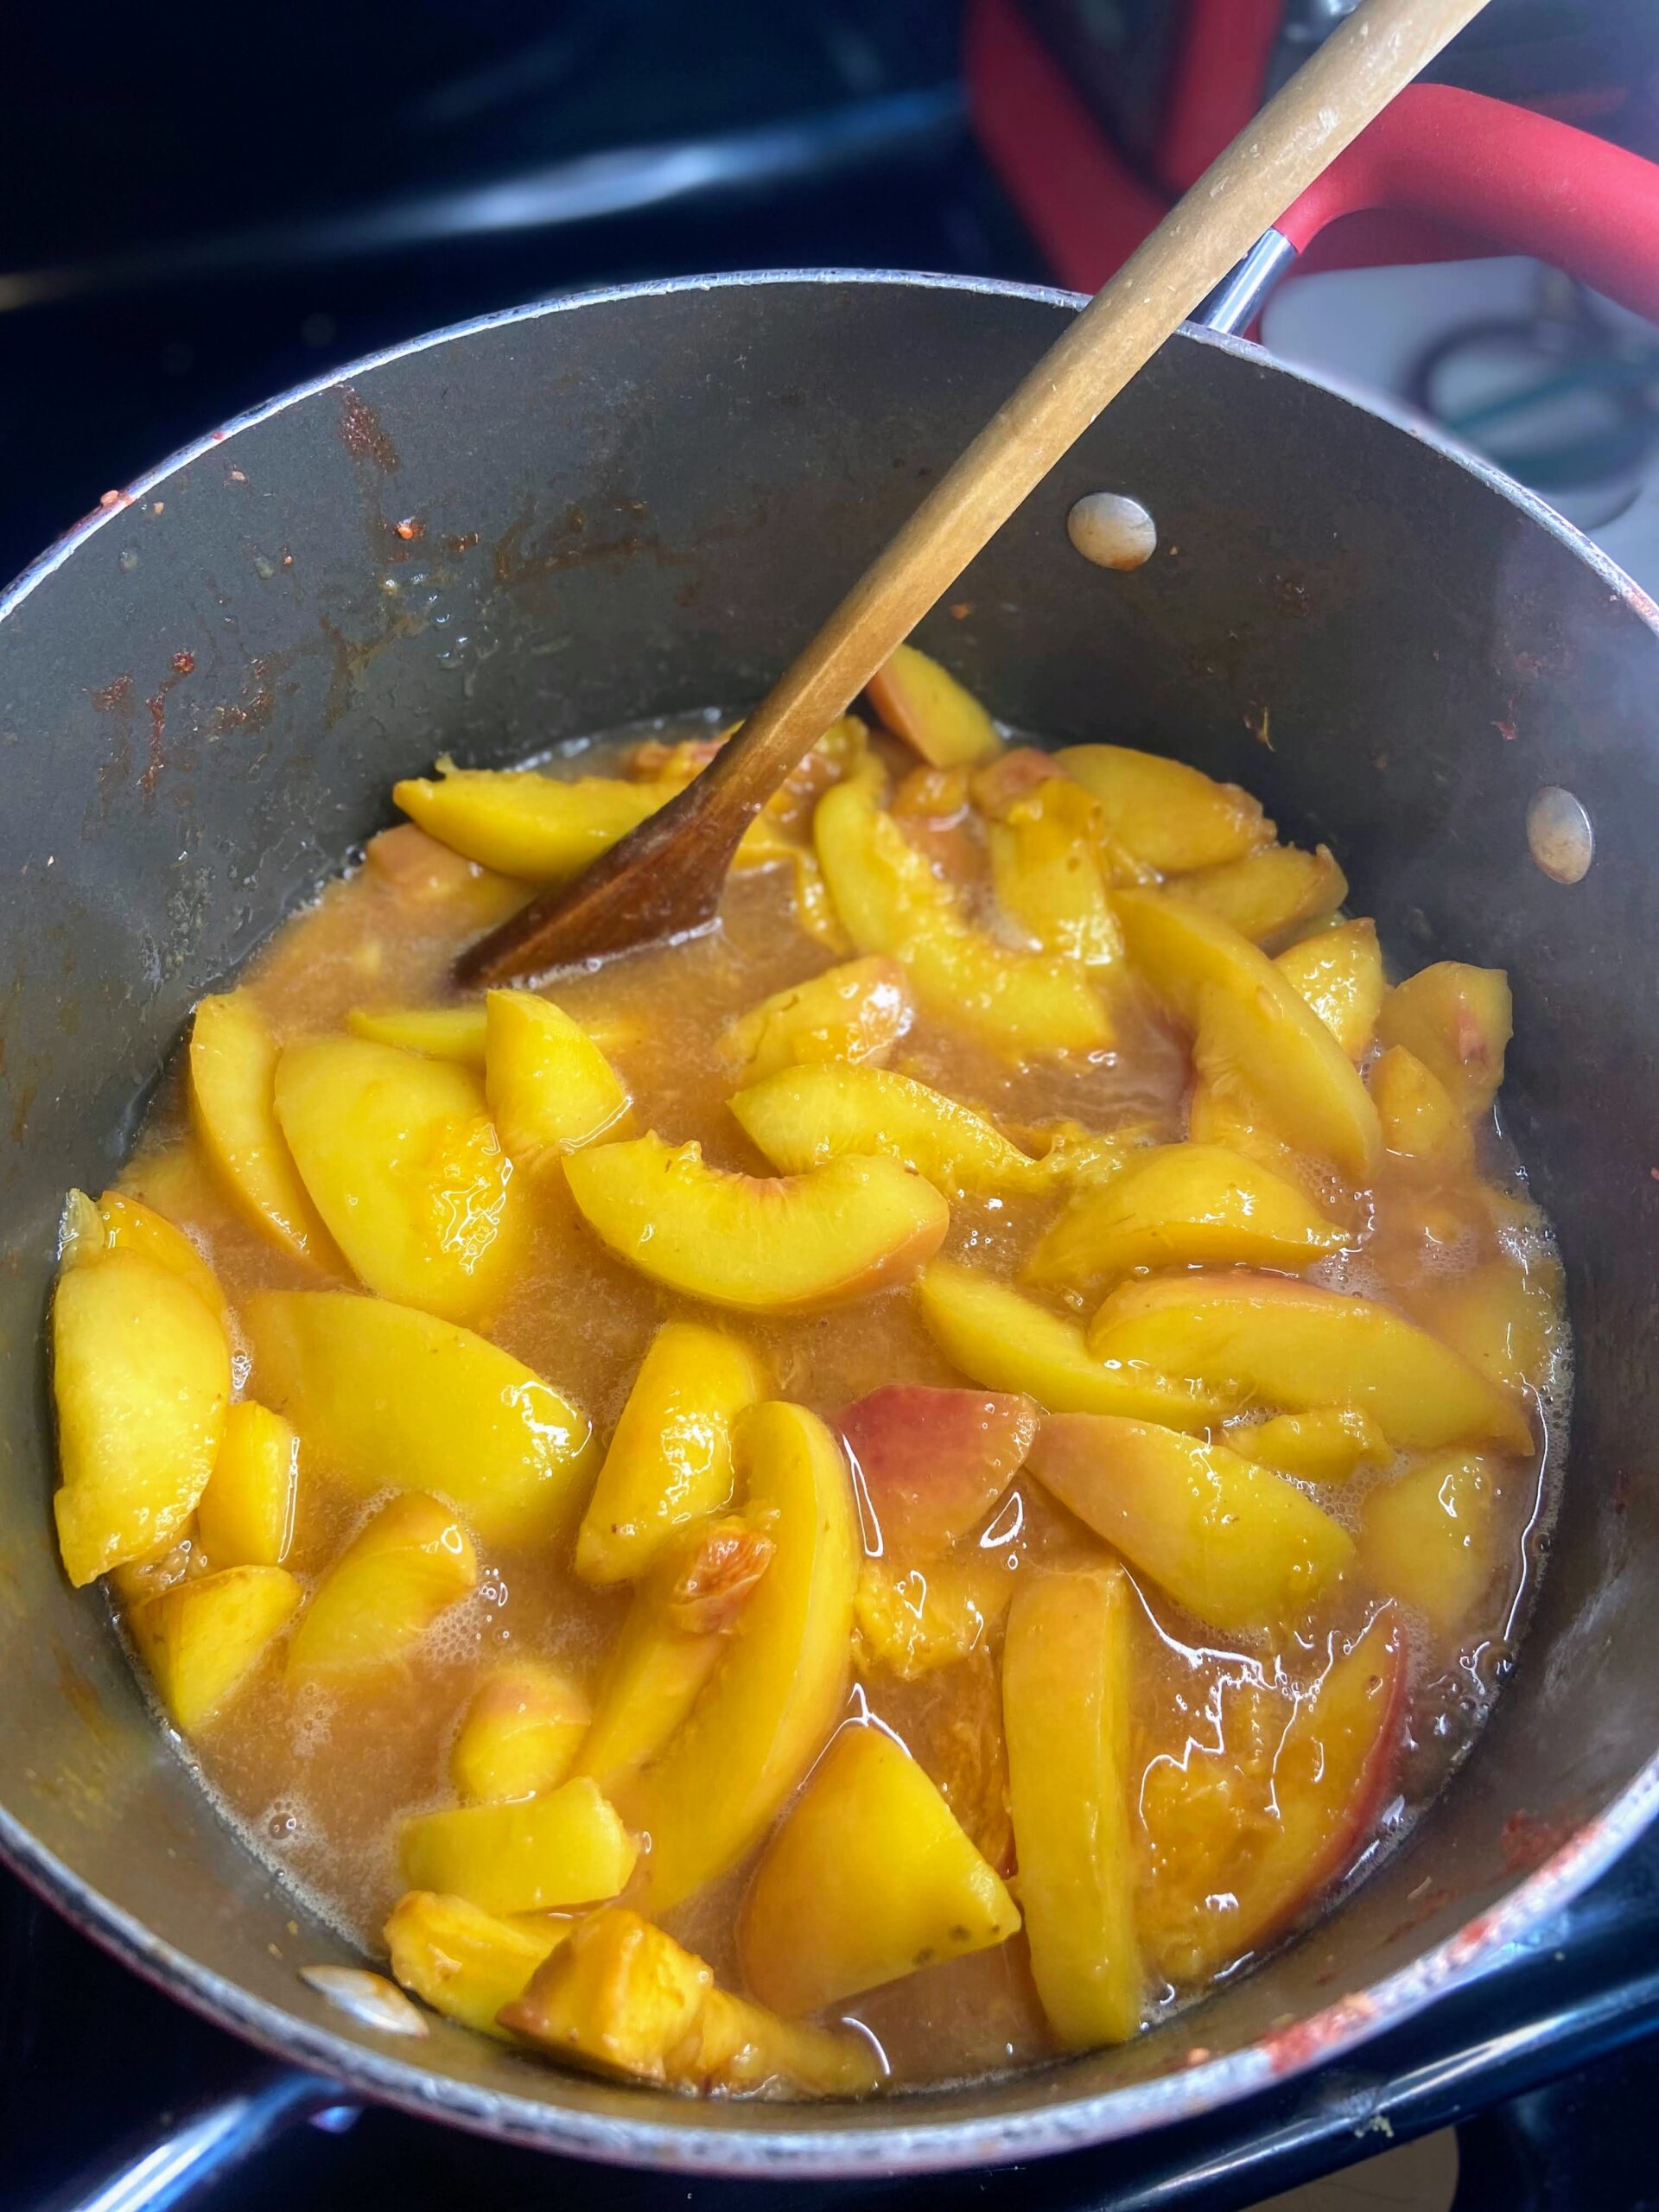 Cooked down peaches